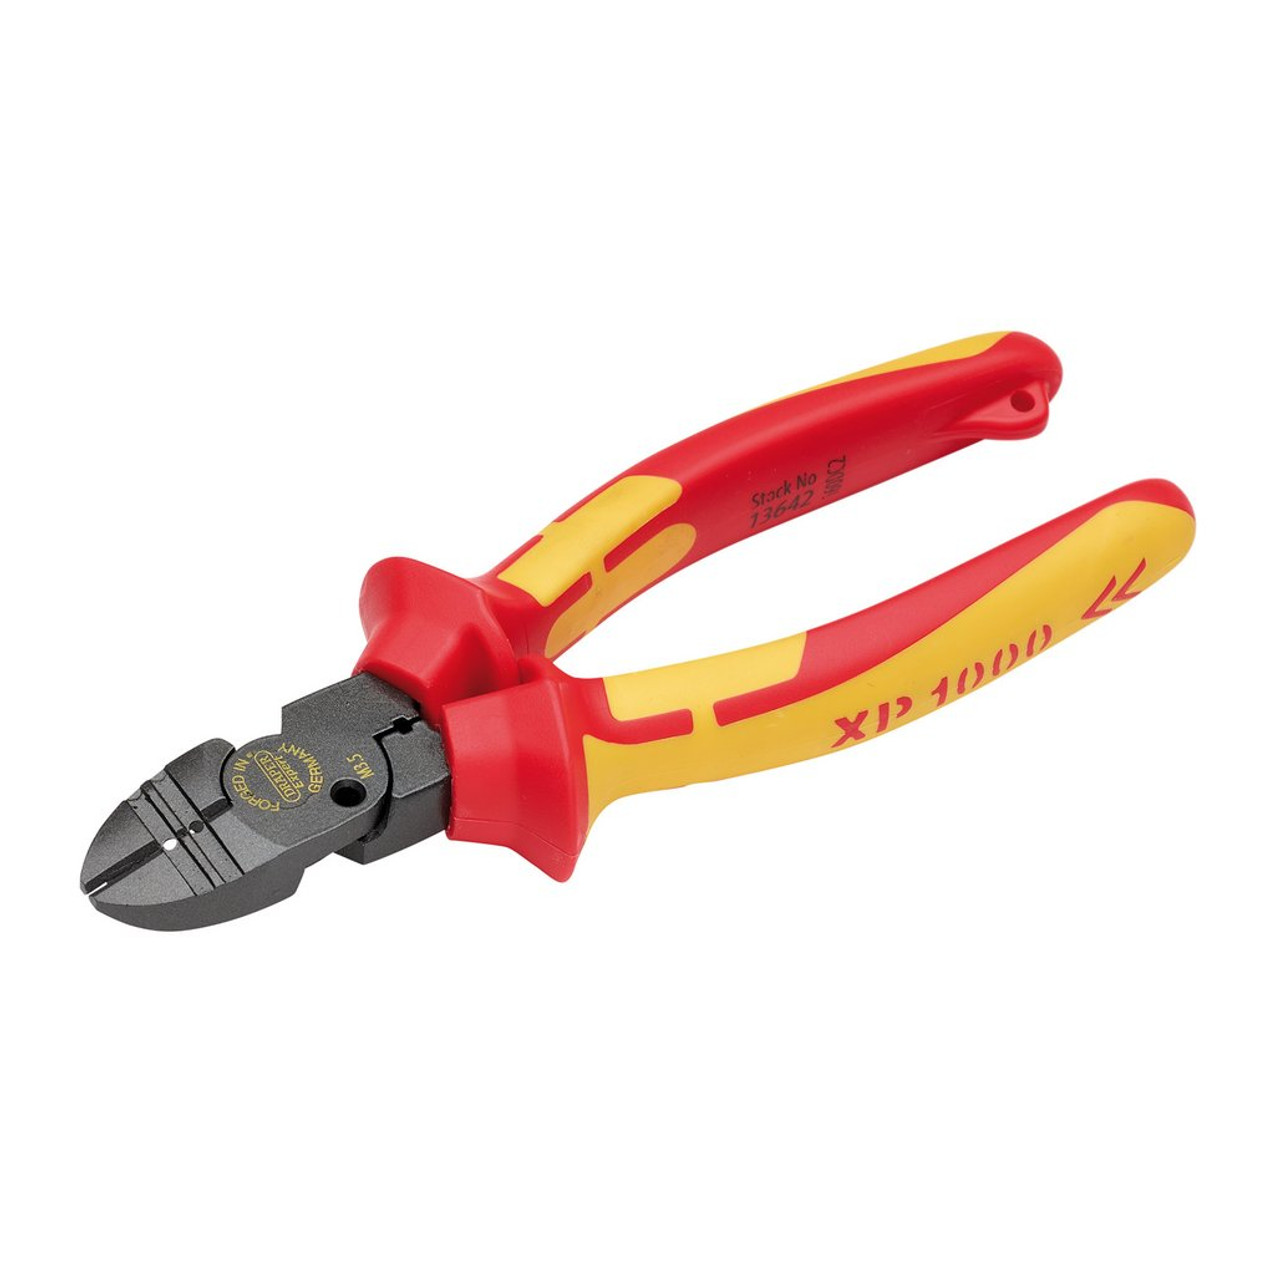 XP1000® VDE Tethered 4-in-1 Combination Cutter, 160mm